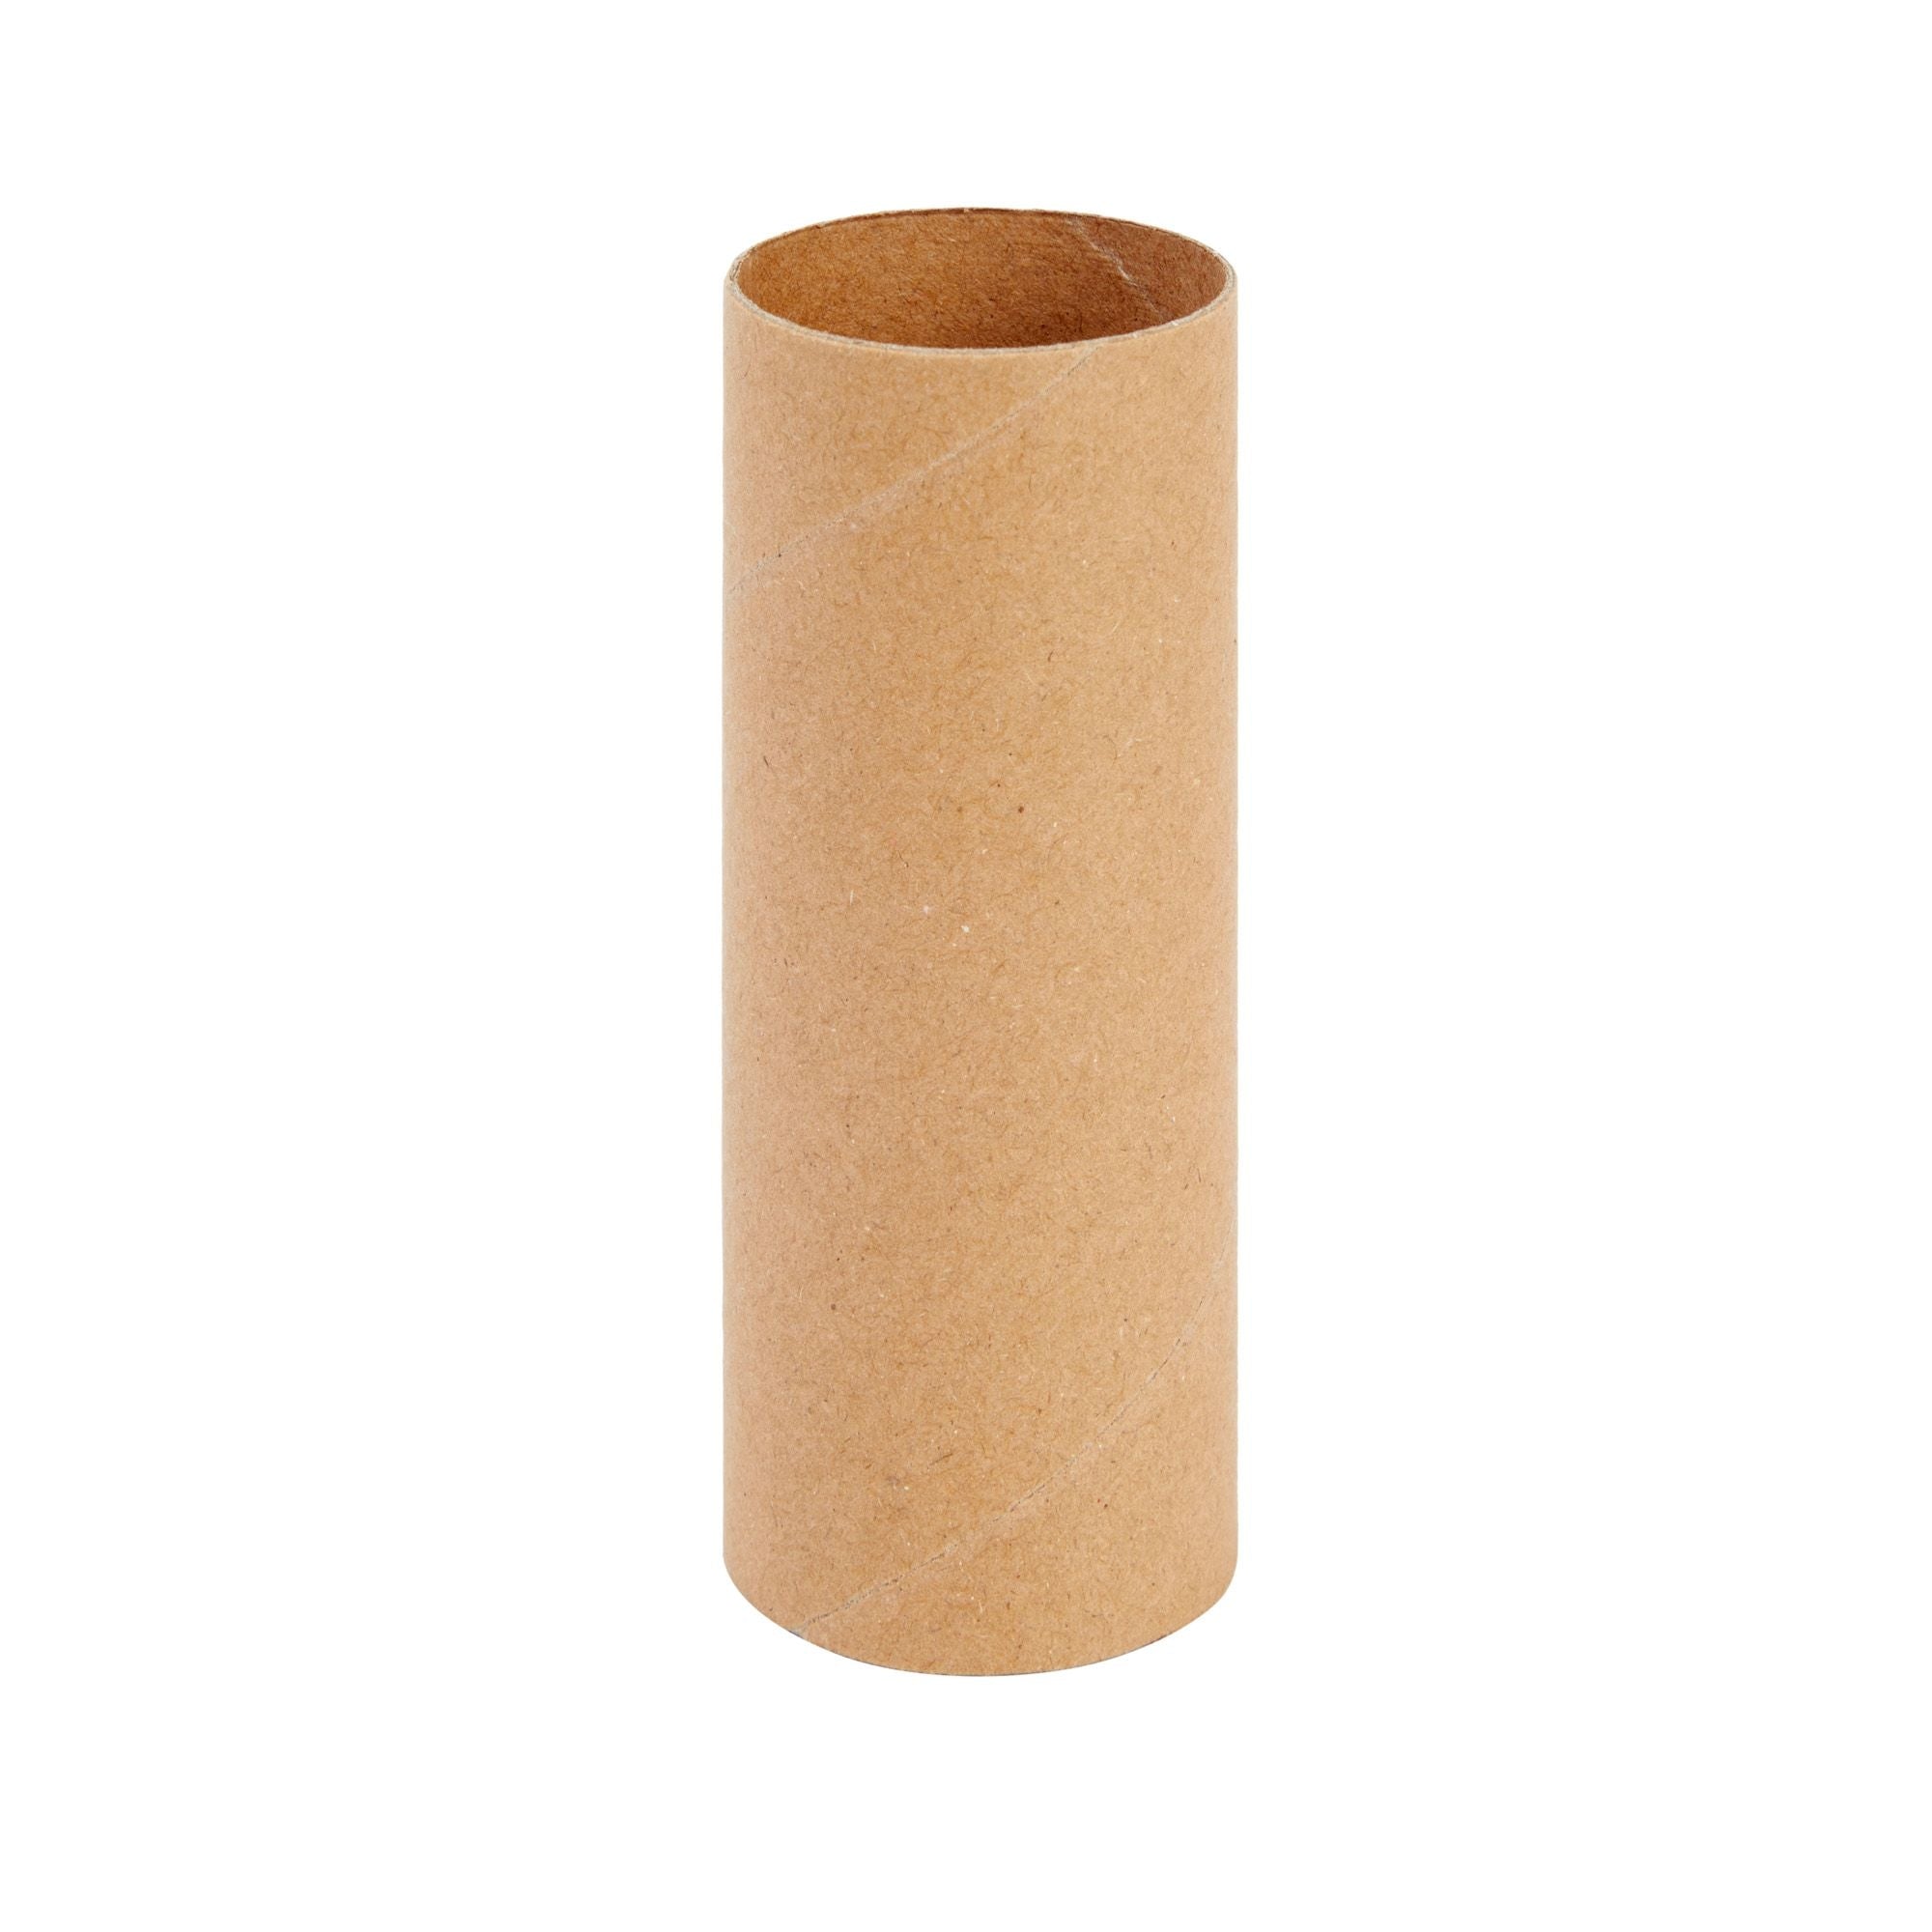 48 Pack Empty Toilet Paper Rolls for Crafts, Brown Cardboard Tubes for –  BrightCreationsOfficial